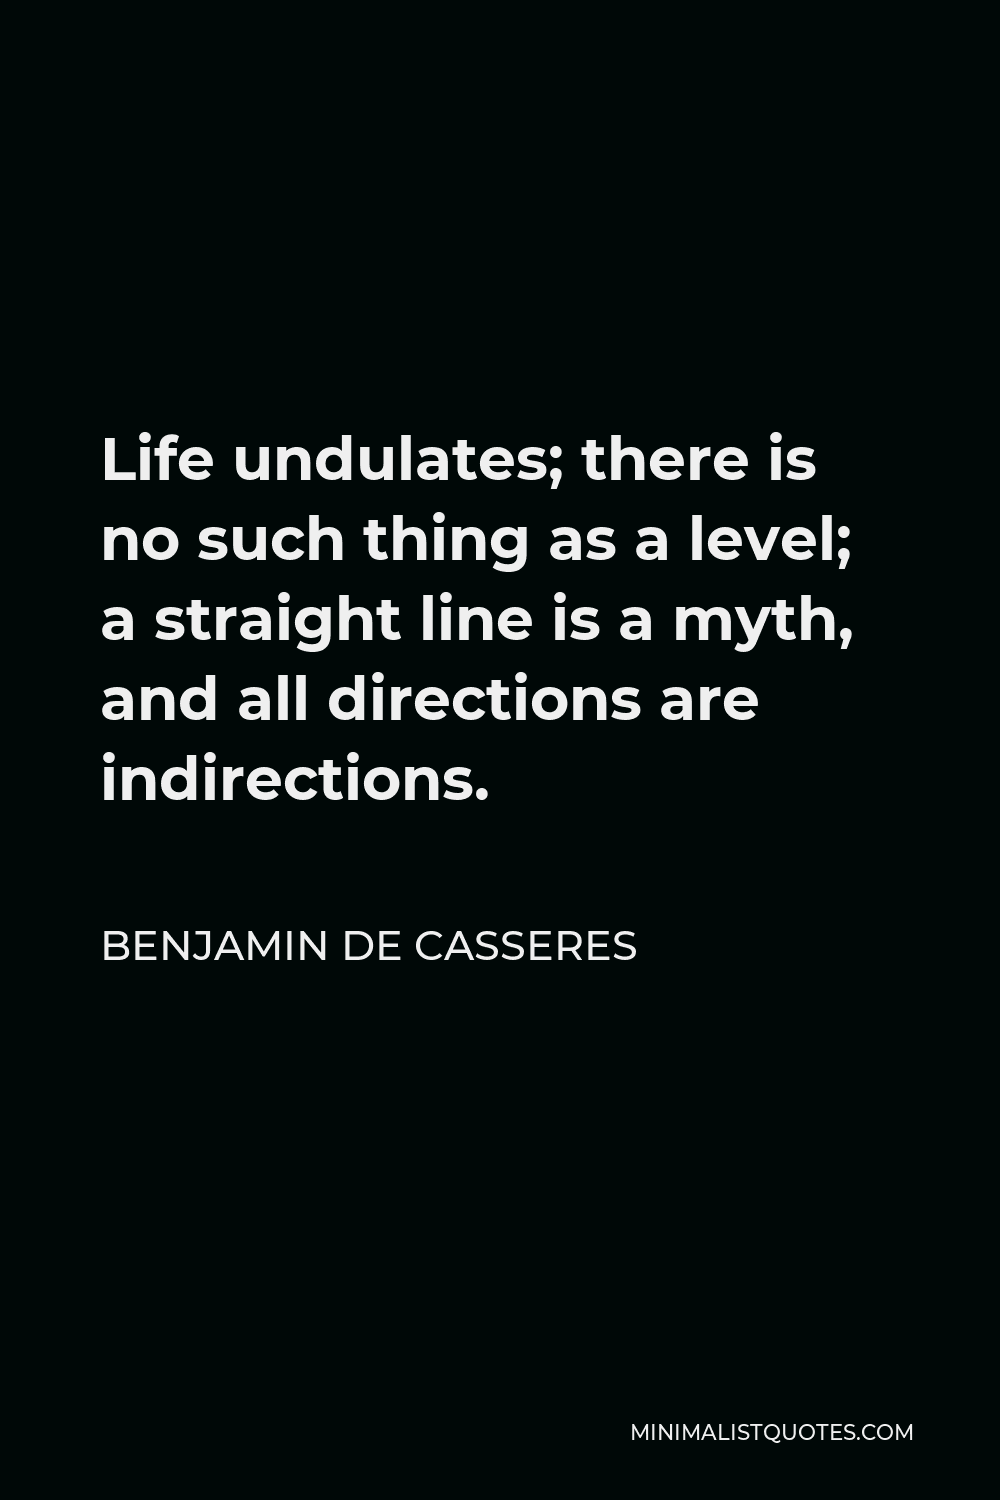 Benjamin De Casseres Quote - Life undulates; there is no such thing as a level; a straight line is a myth, and all directions are indirections.